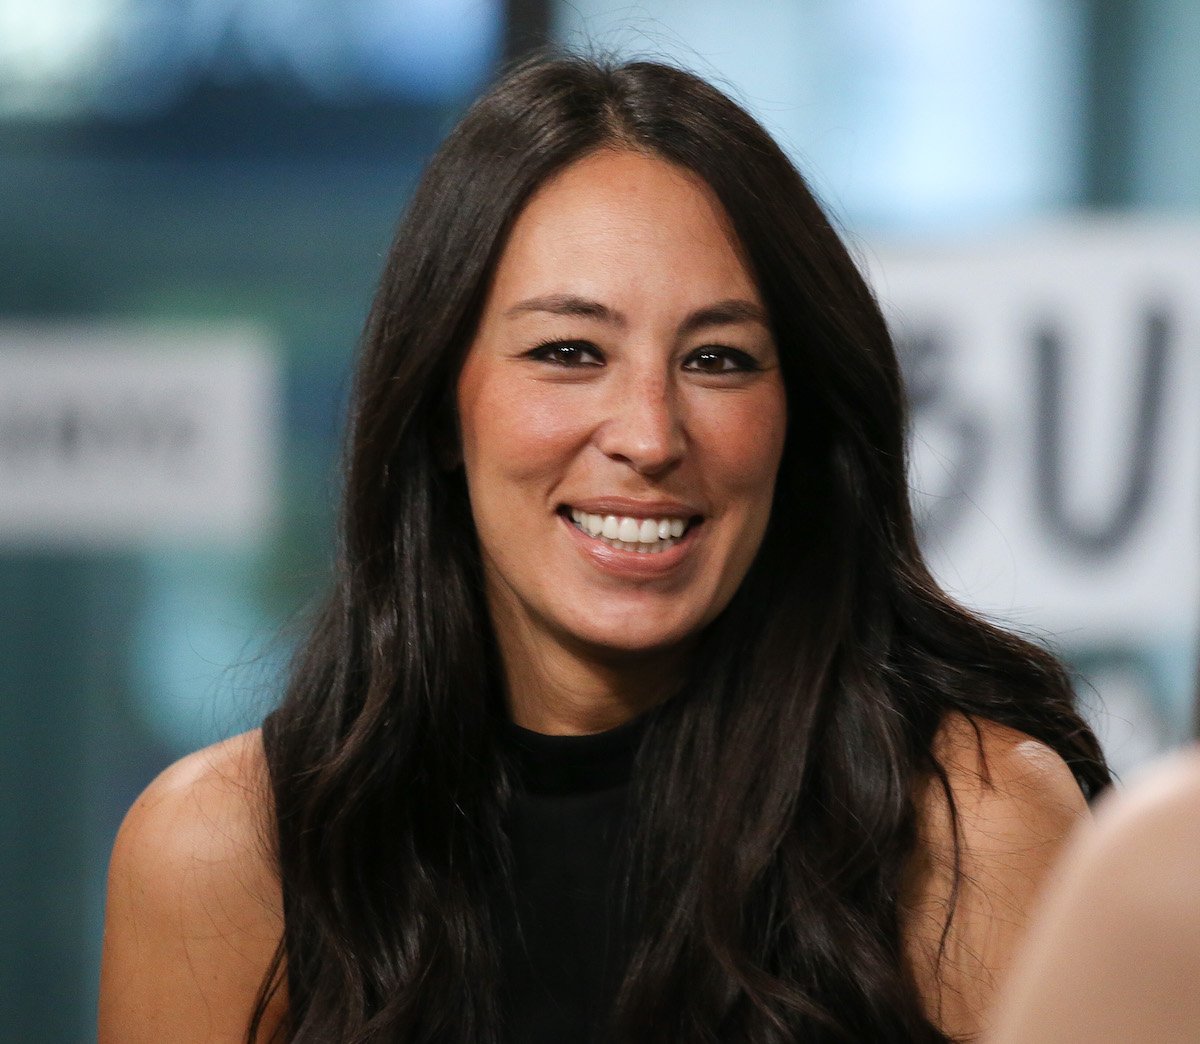 Baking enthusiast Joanna Gaines smiles at the camera.